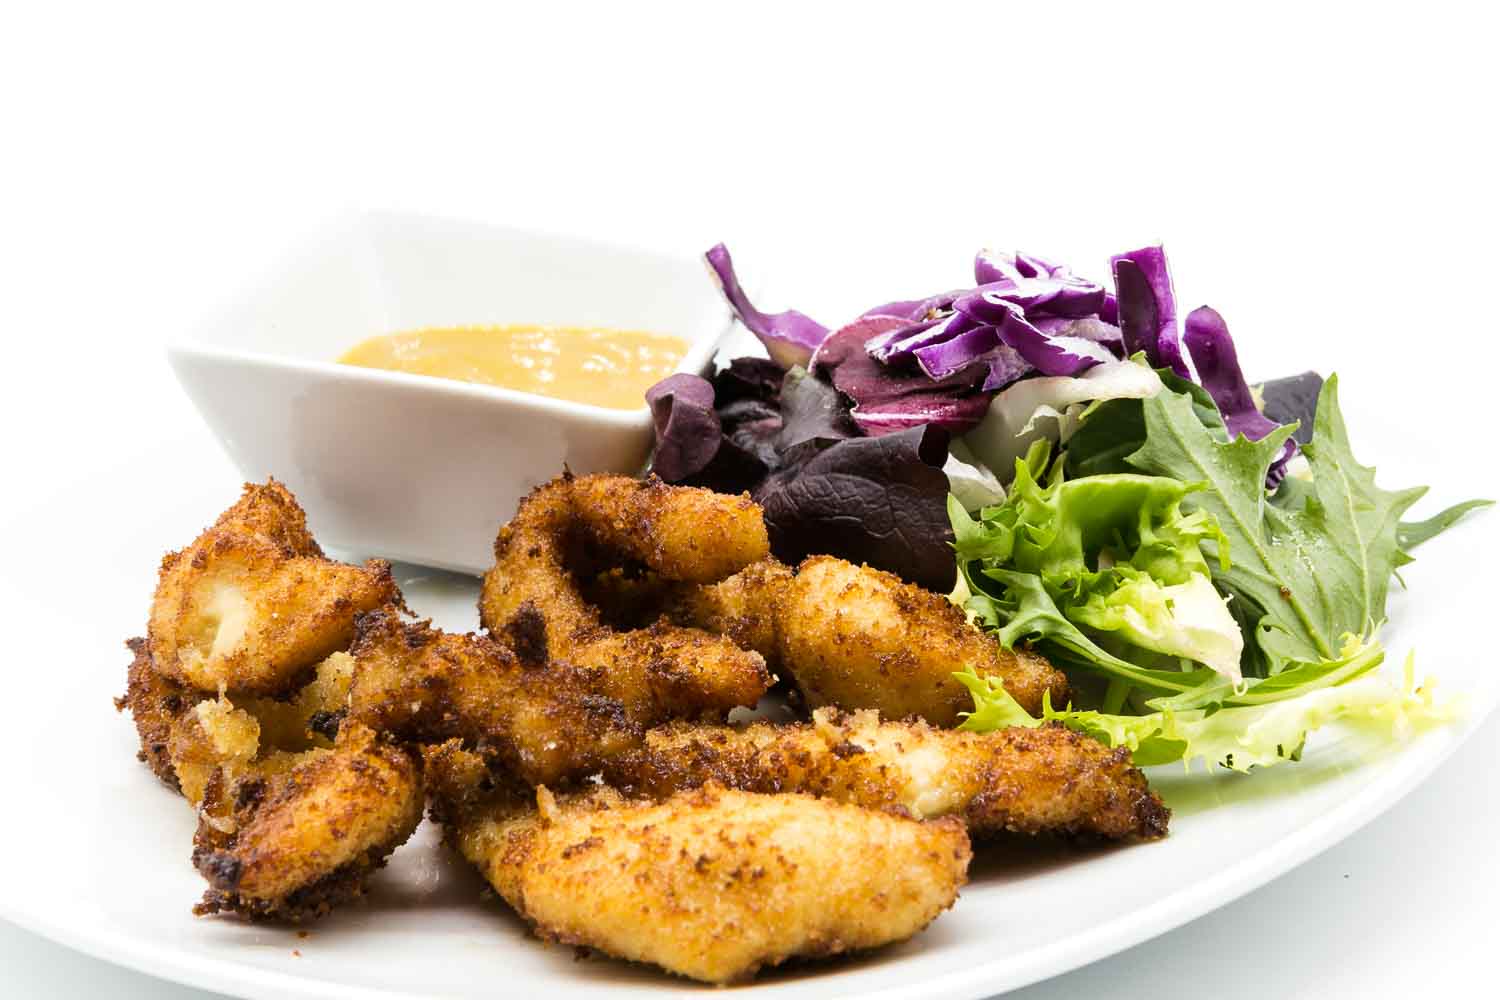 Crunchy Chicken fingers with honey and mustard sauce